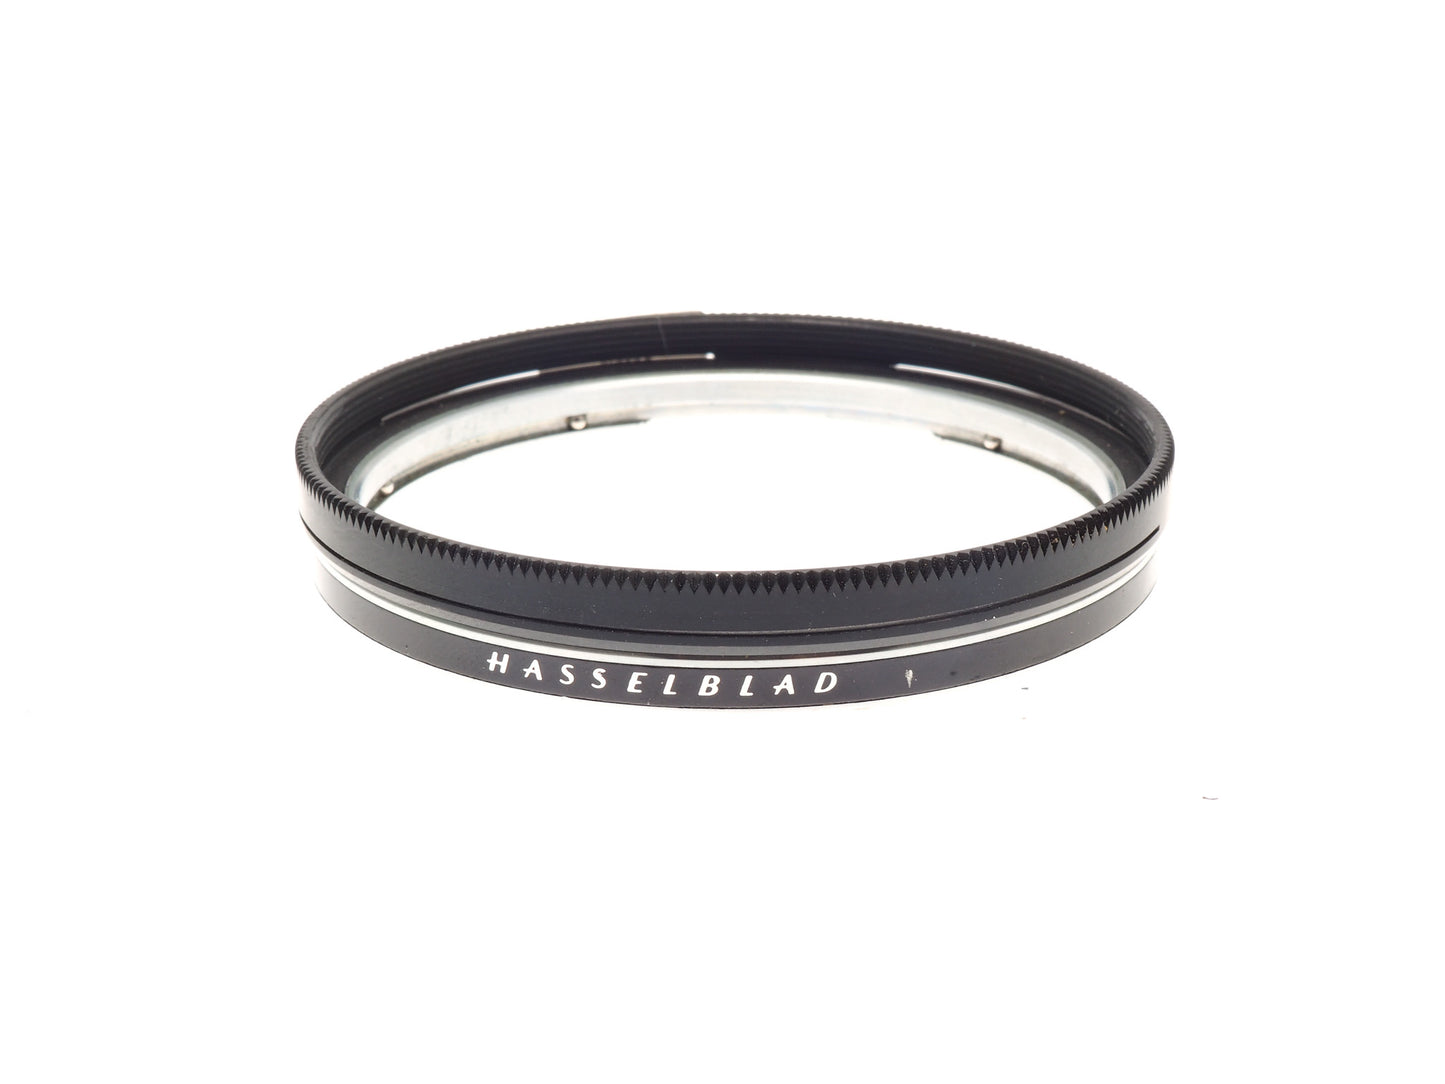 Hasselblad Filter Adapter Ring Series 63 B50 - Accessory